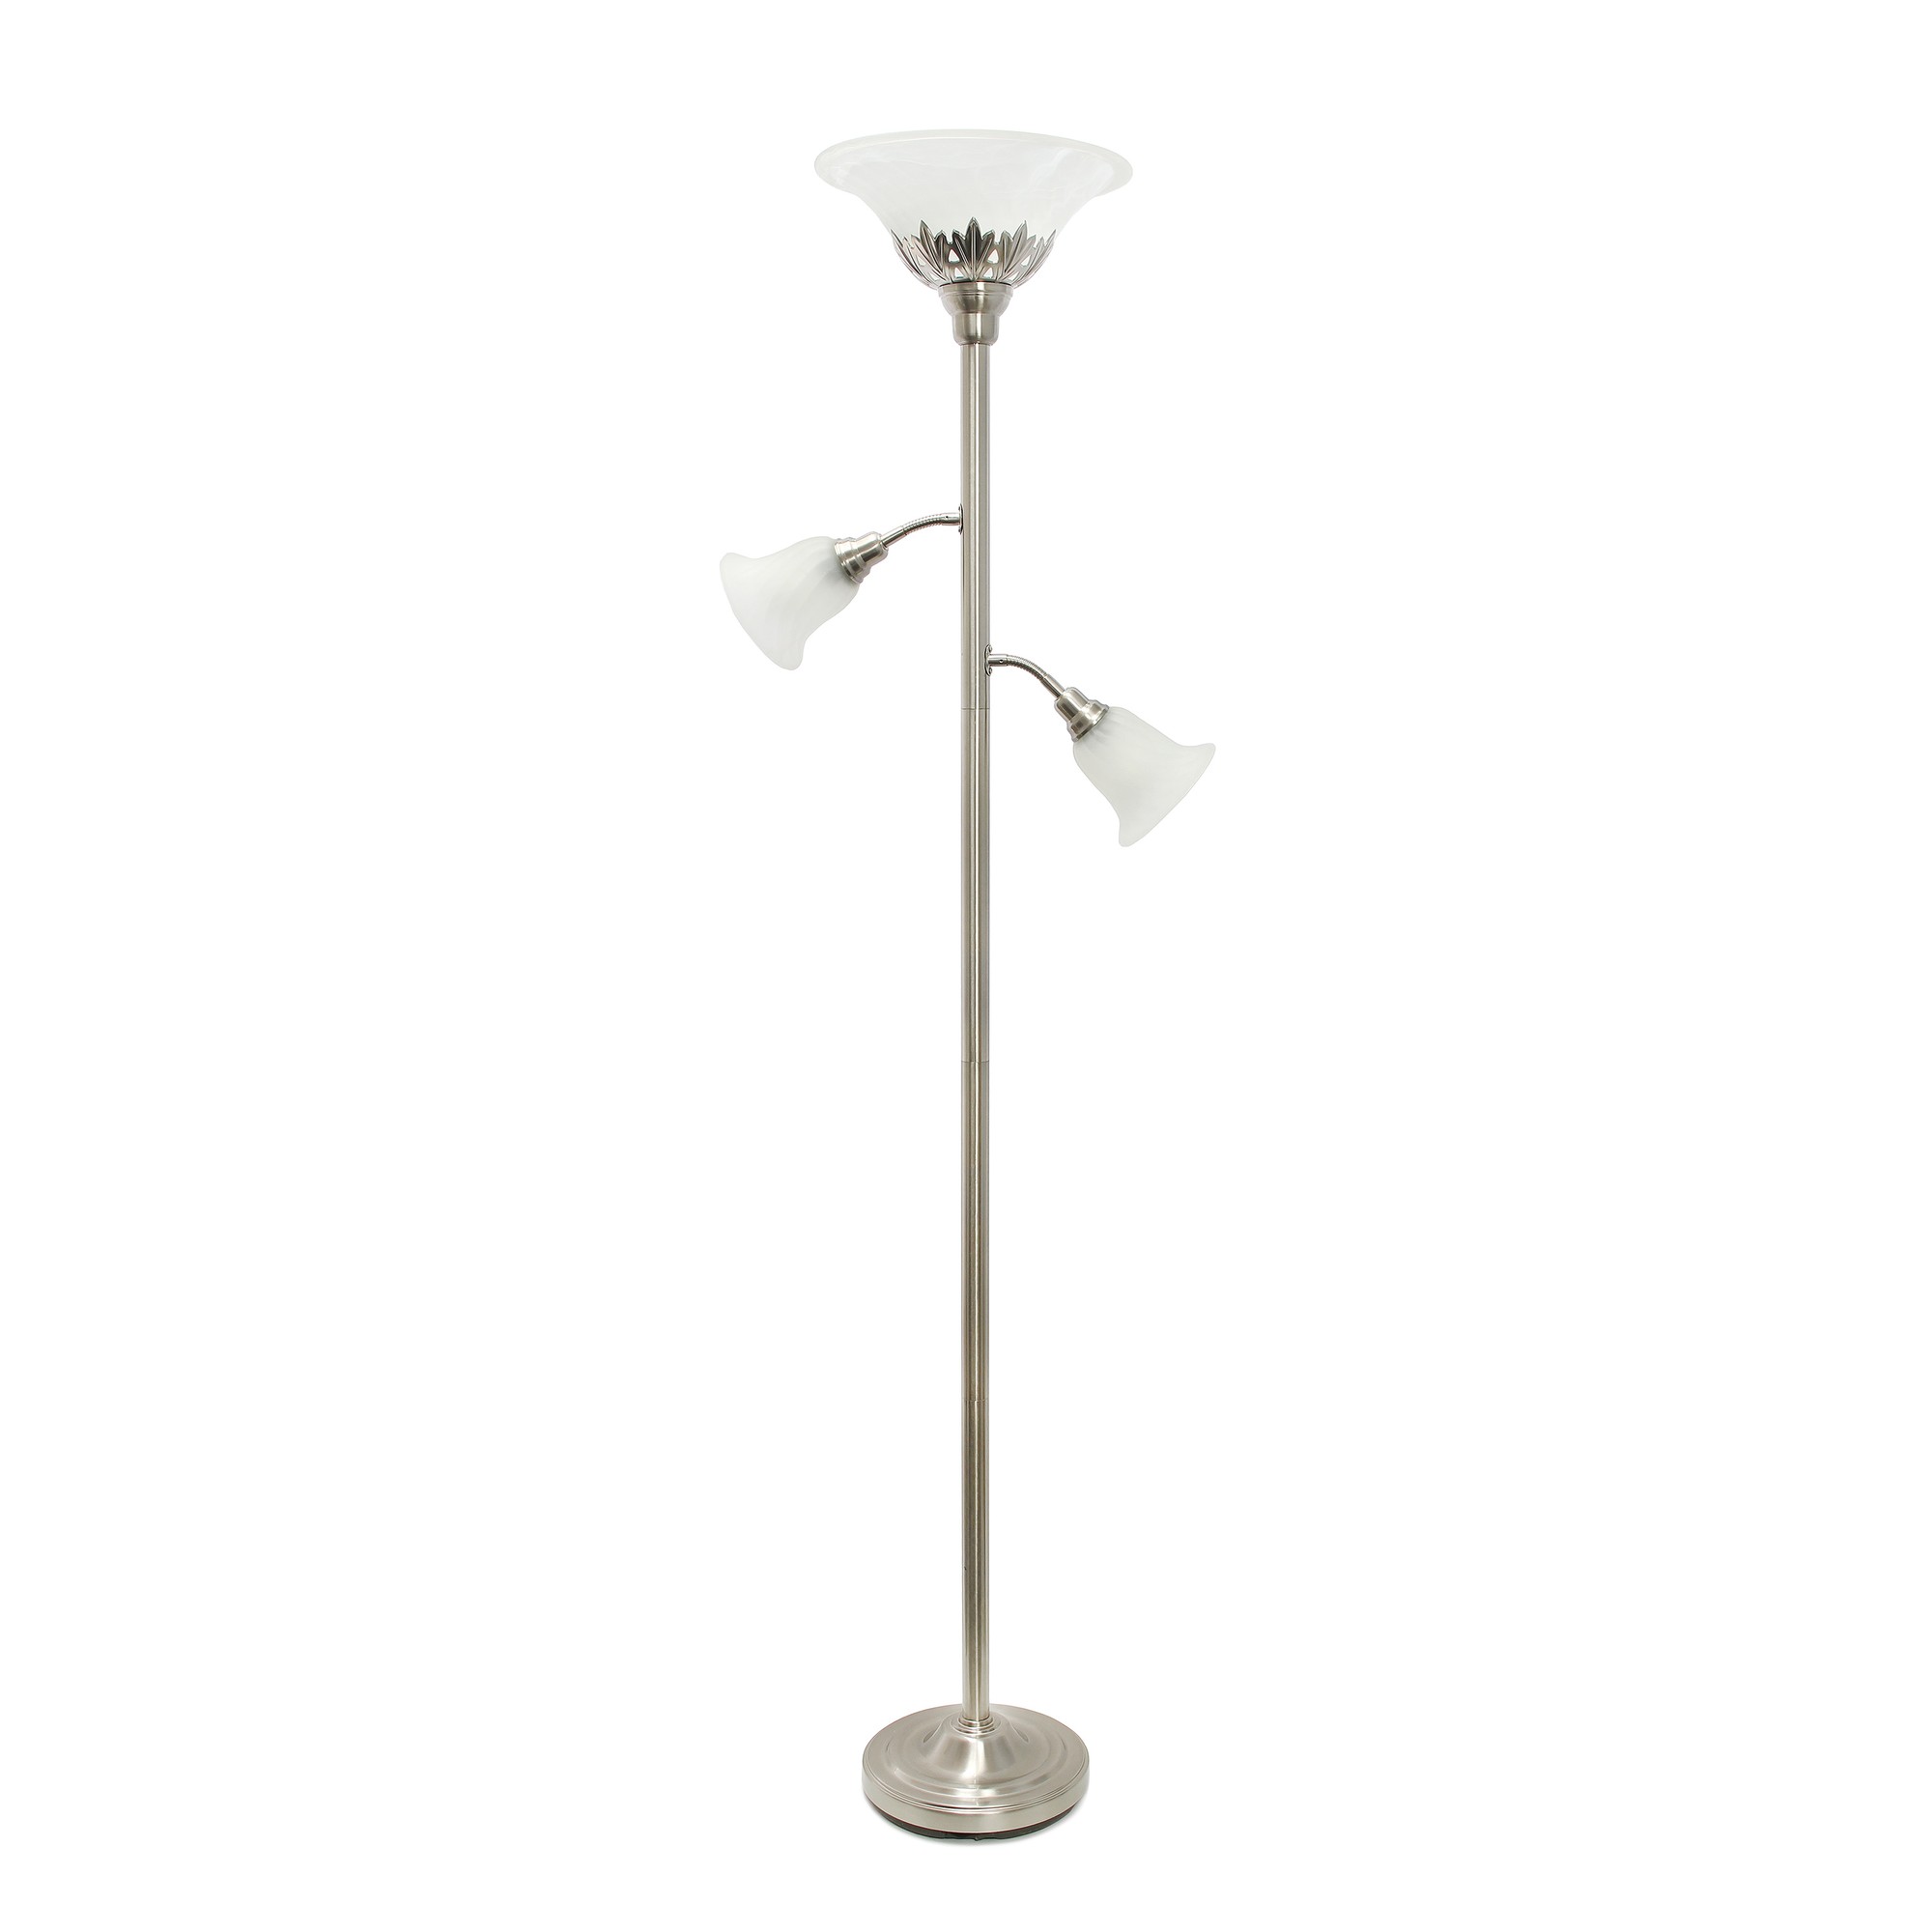 Elegant Designs 3 Light Floor Lamp with Scalloped Glass Shades, Brushed Nickel